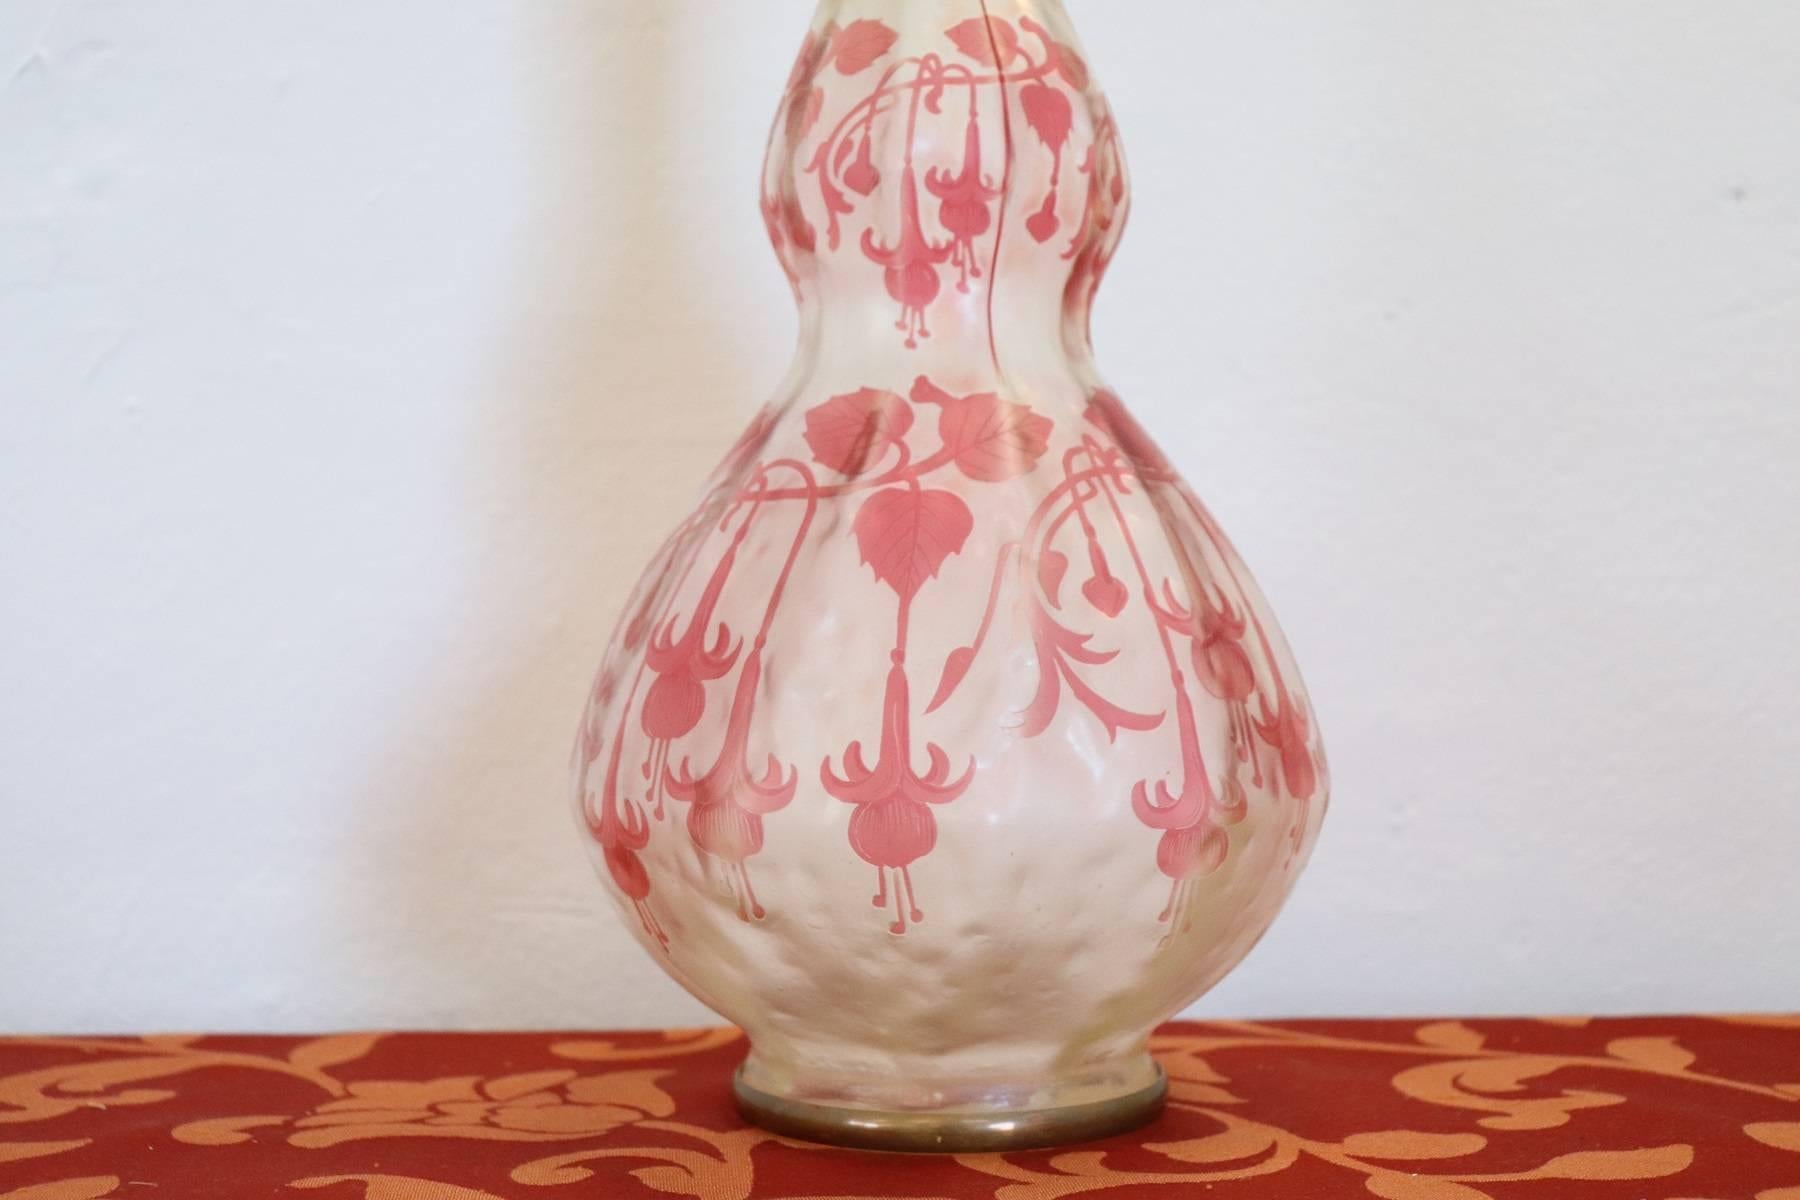 Important and refined French vase, circa 1910s.
Beautiful cameo glass vase with etched decoration of red Fuchsias on an iridescent fond. Cristallerie de Pantin signed.
From an important Italian collection of French artistic glass.